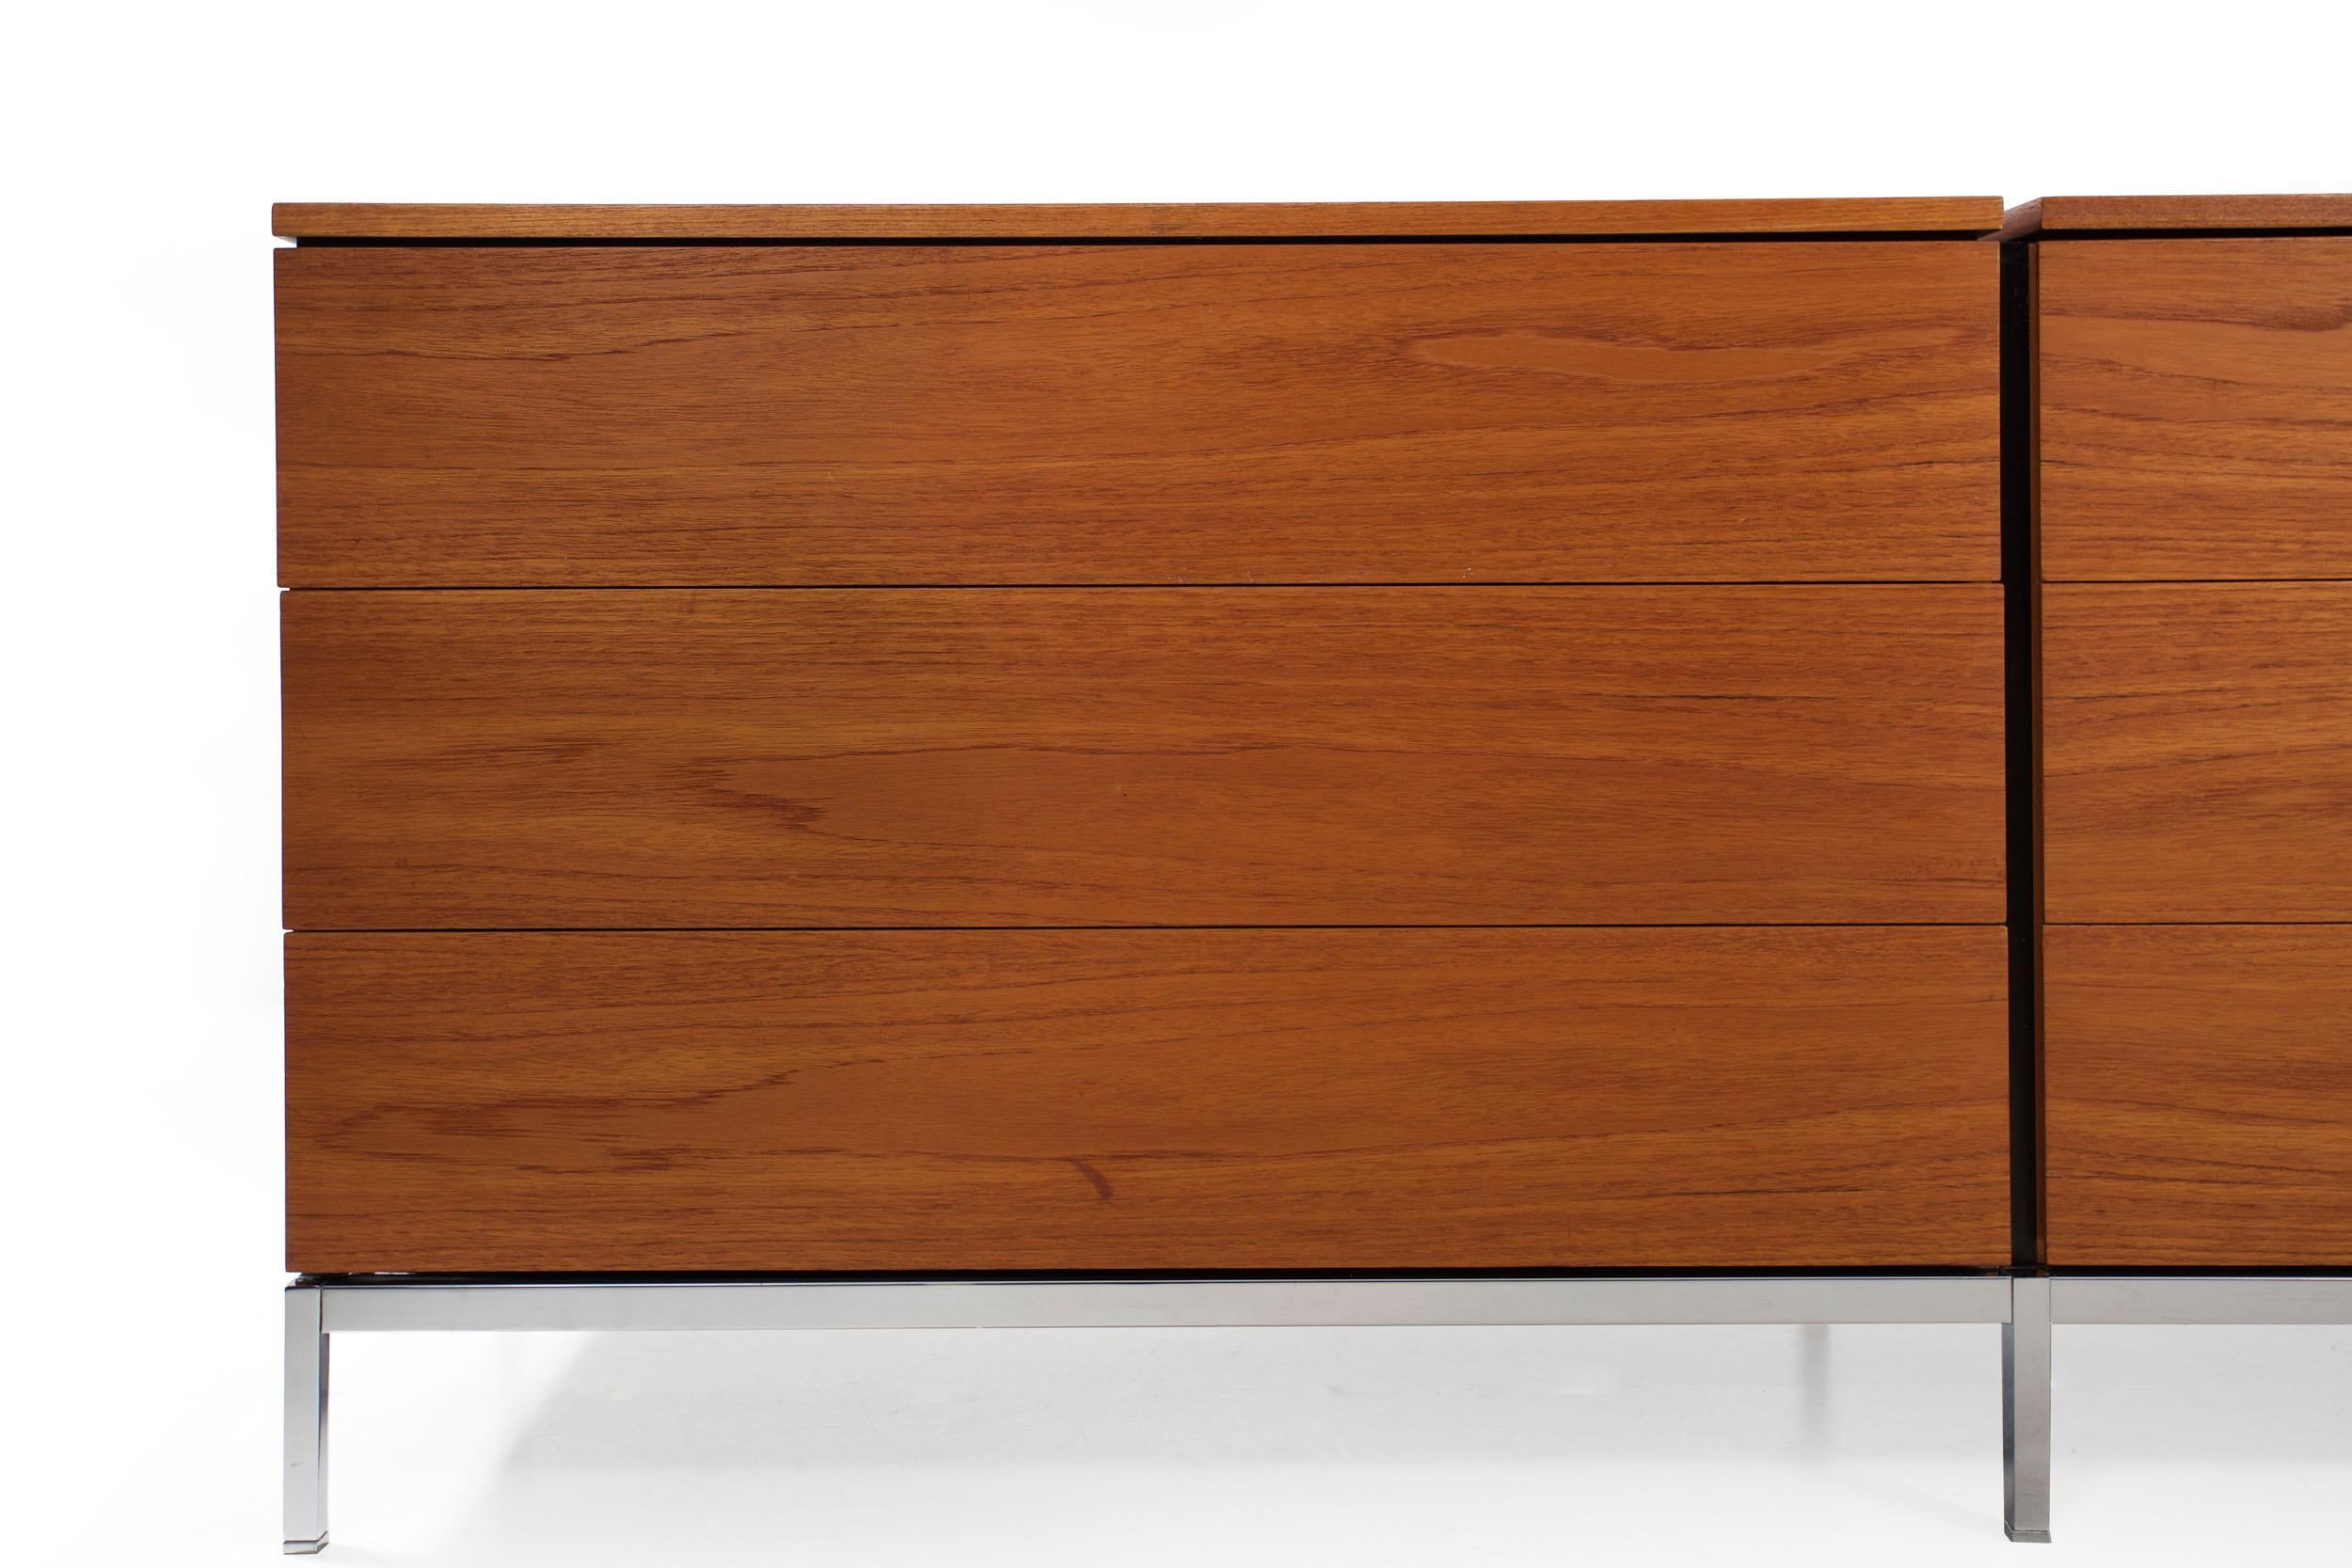 Knoll Mid-Century Modern Teak and Chrome Double Chest Credenza, circa 1970 For Sale 3